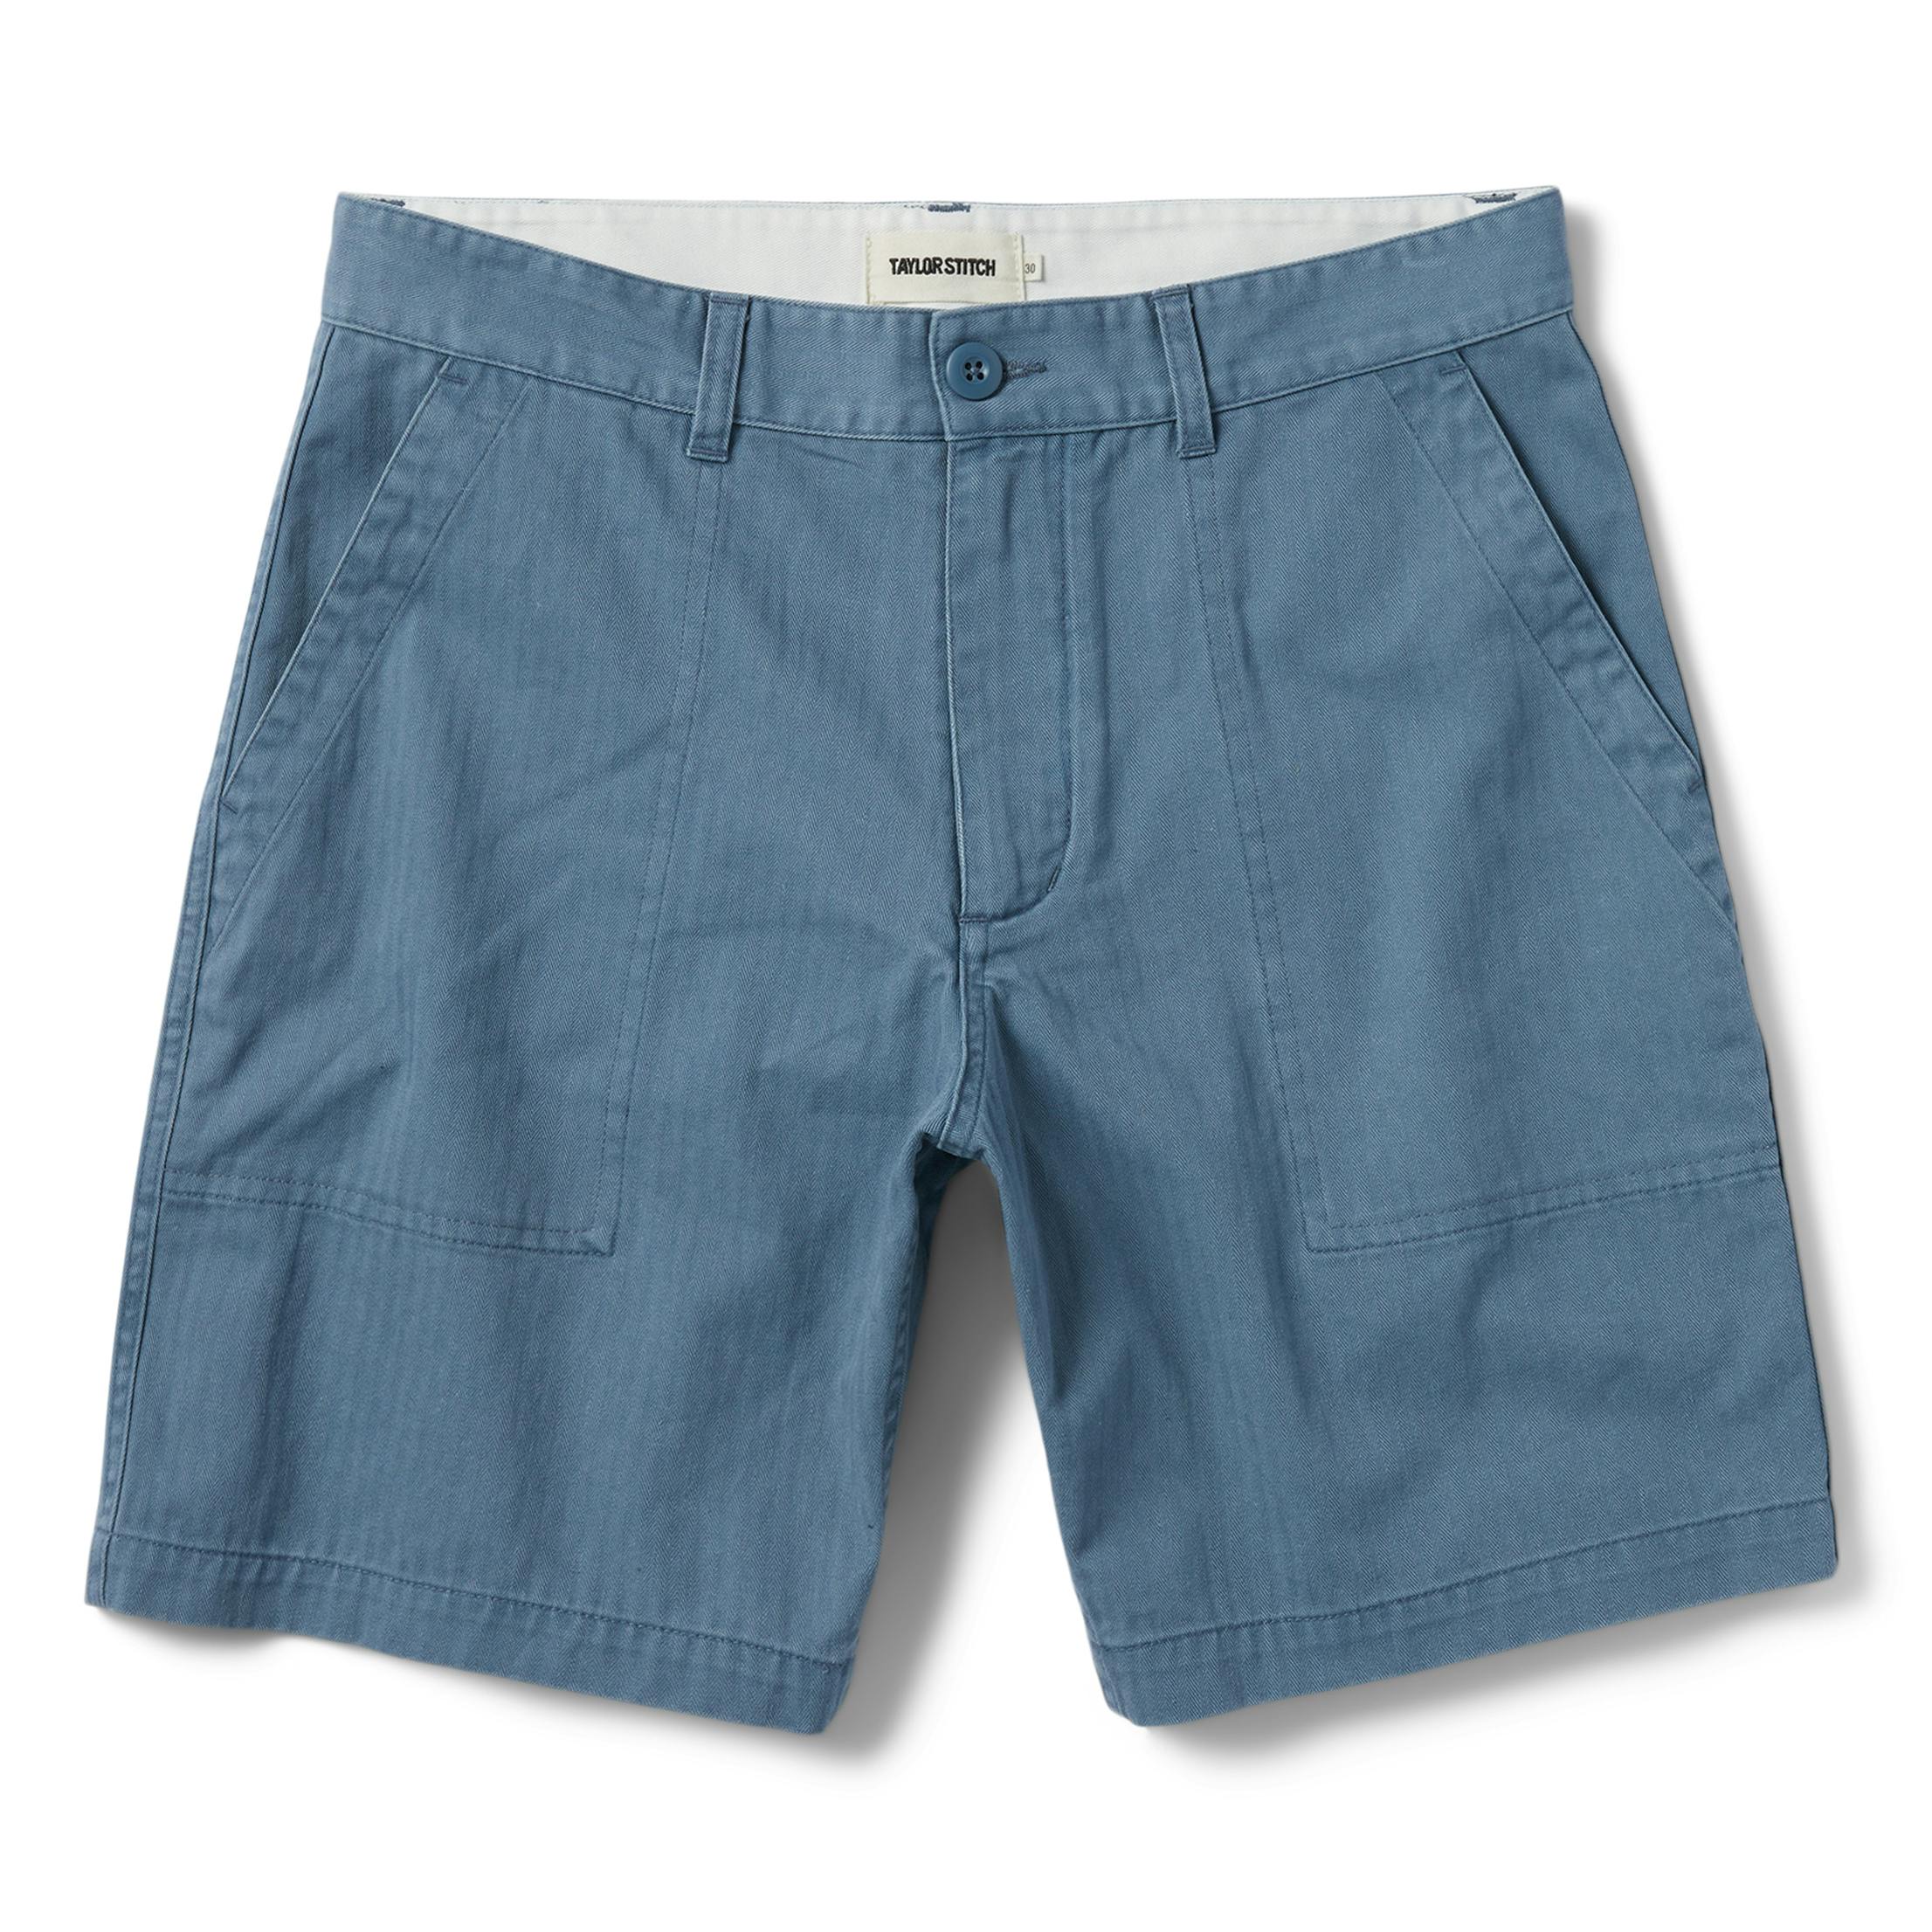 The Trail Short - 8"